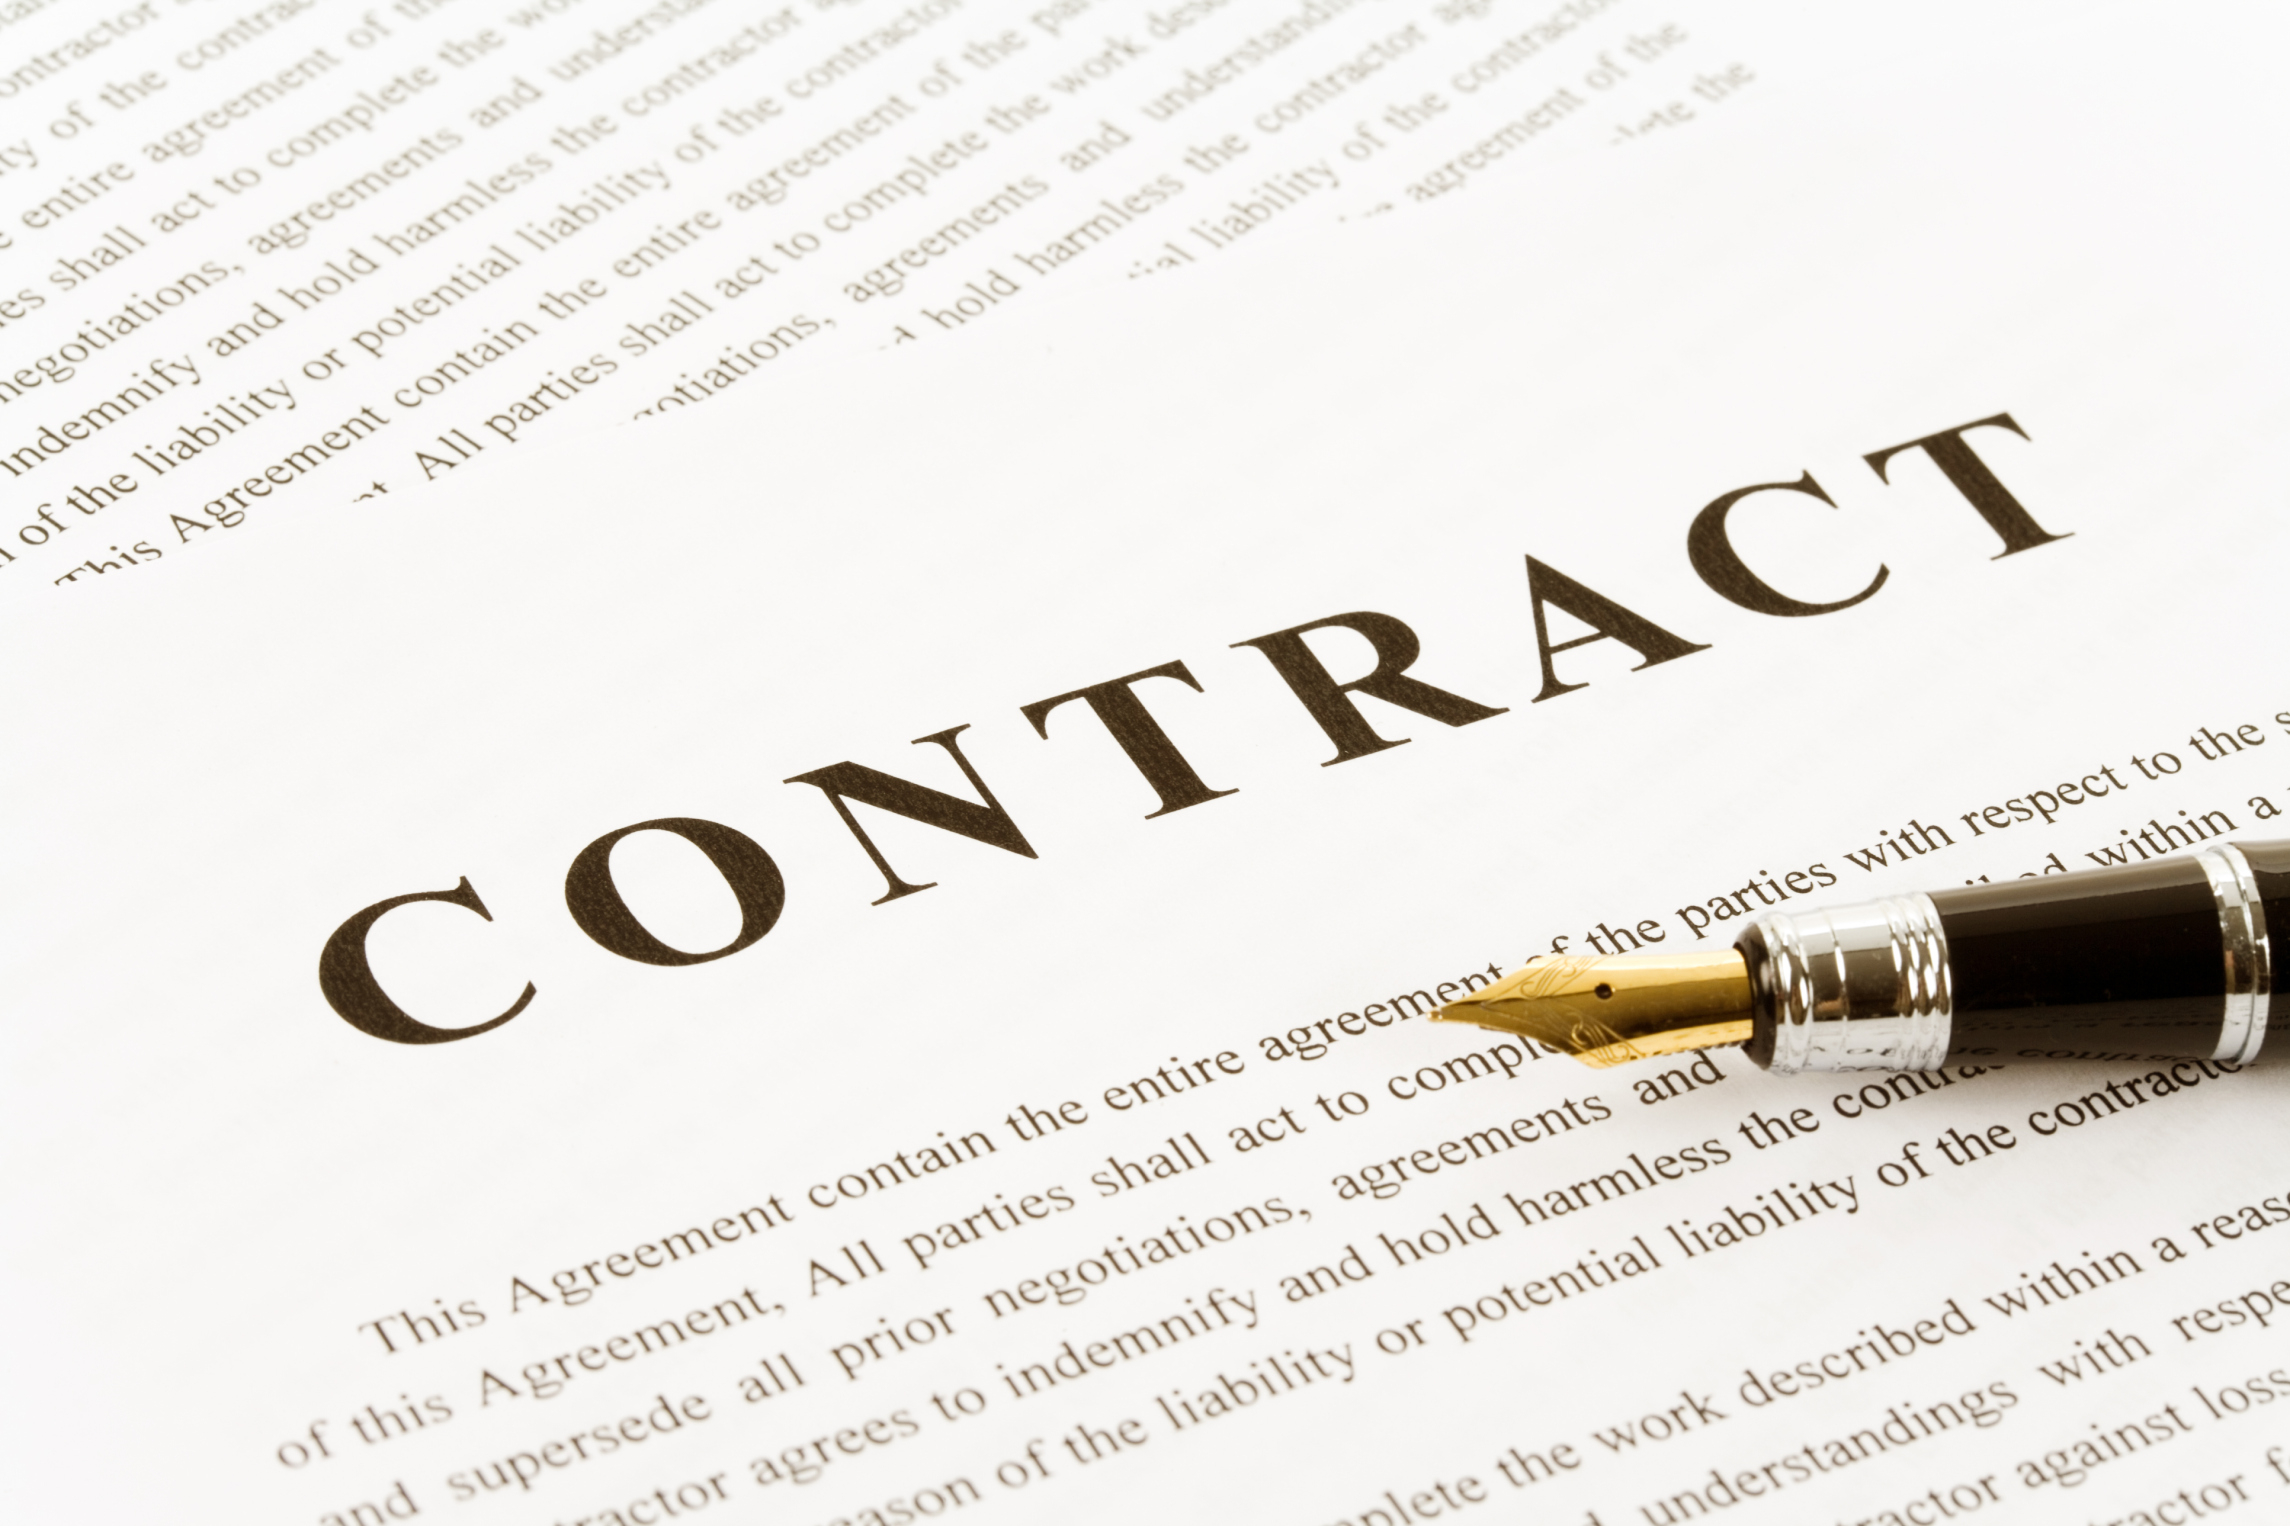 Independent Contractor Agreement Massage Therapist How To Create A Successful Partnership